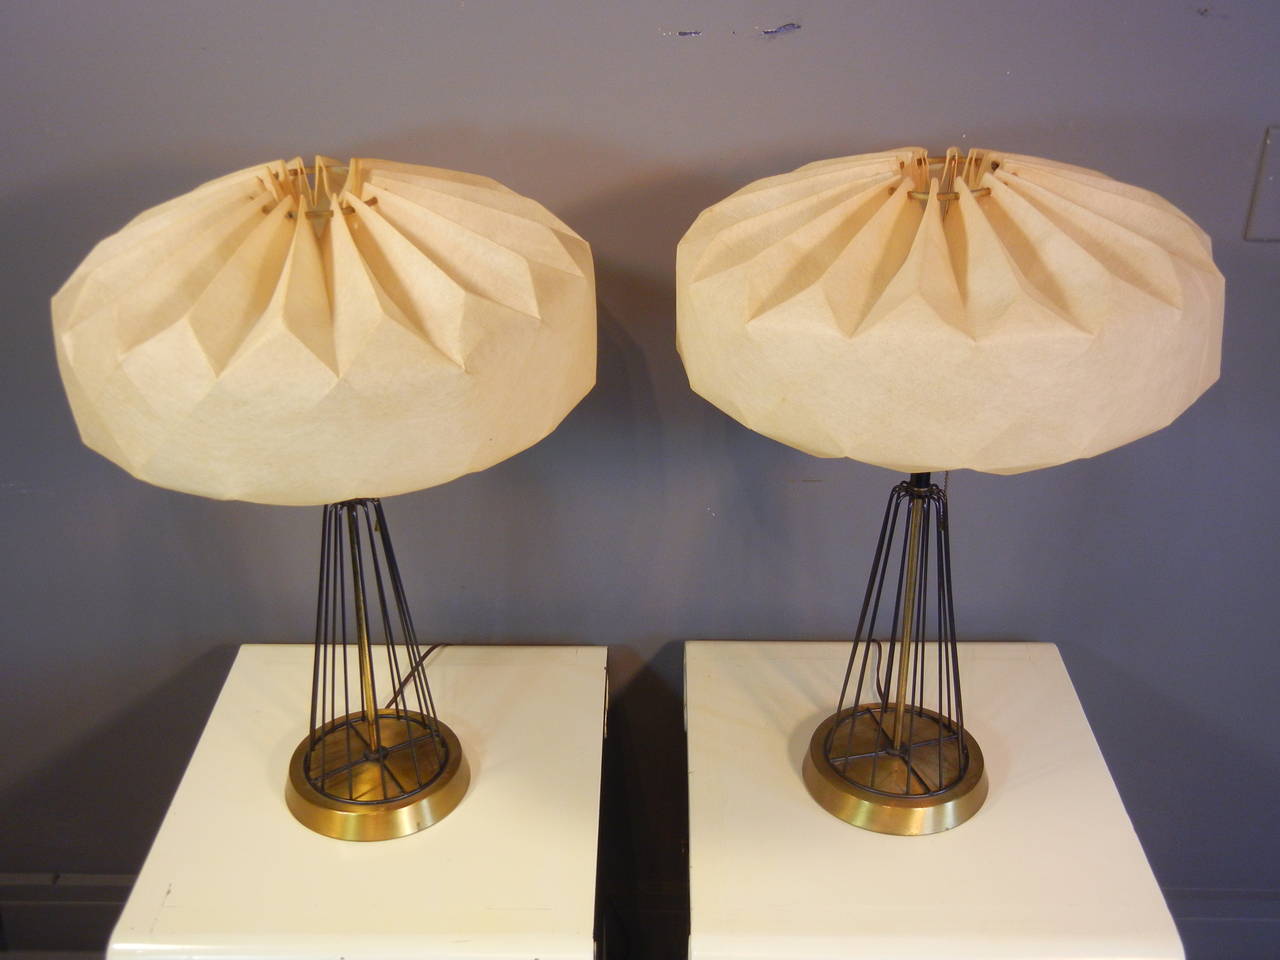 Forged Pair of Mid-Century Space Age Table Lamps with Fiberglass Shades